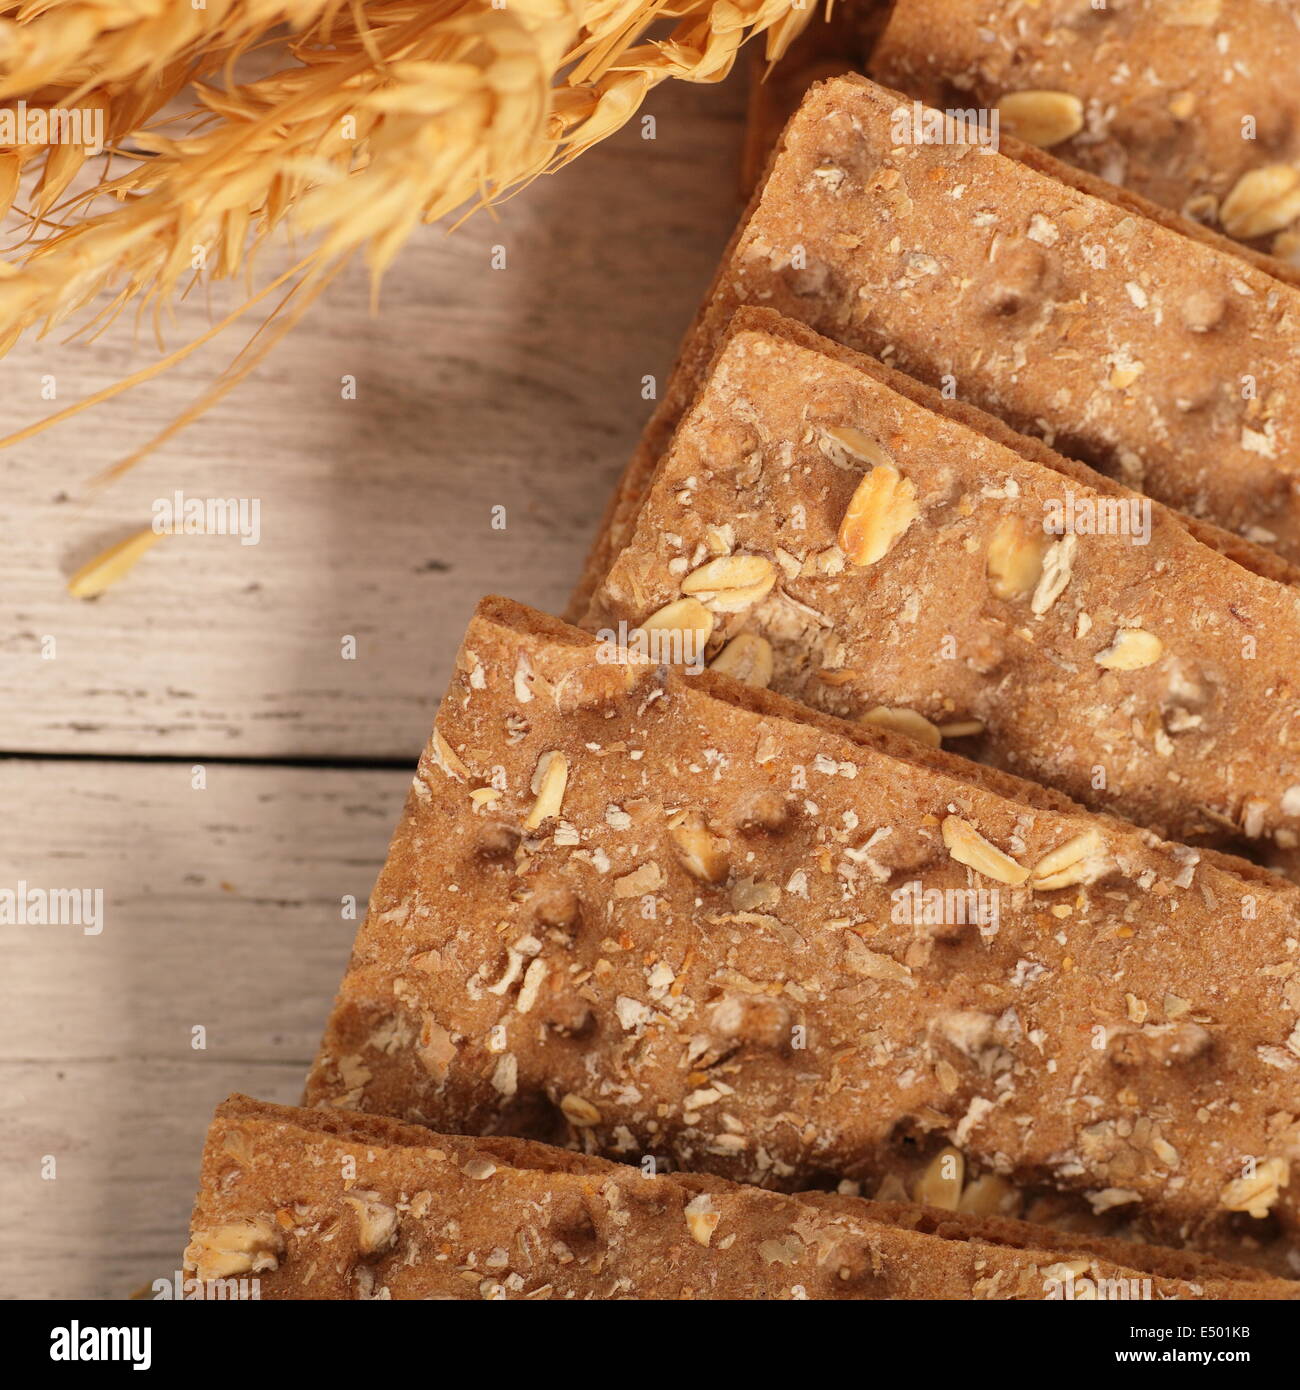 Texture of healthy wheat crackers Stock Photo